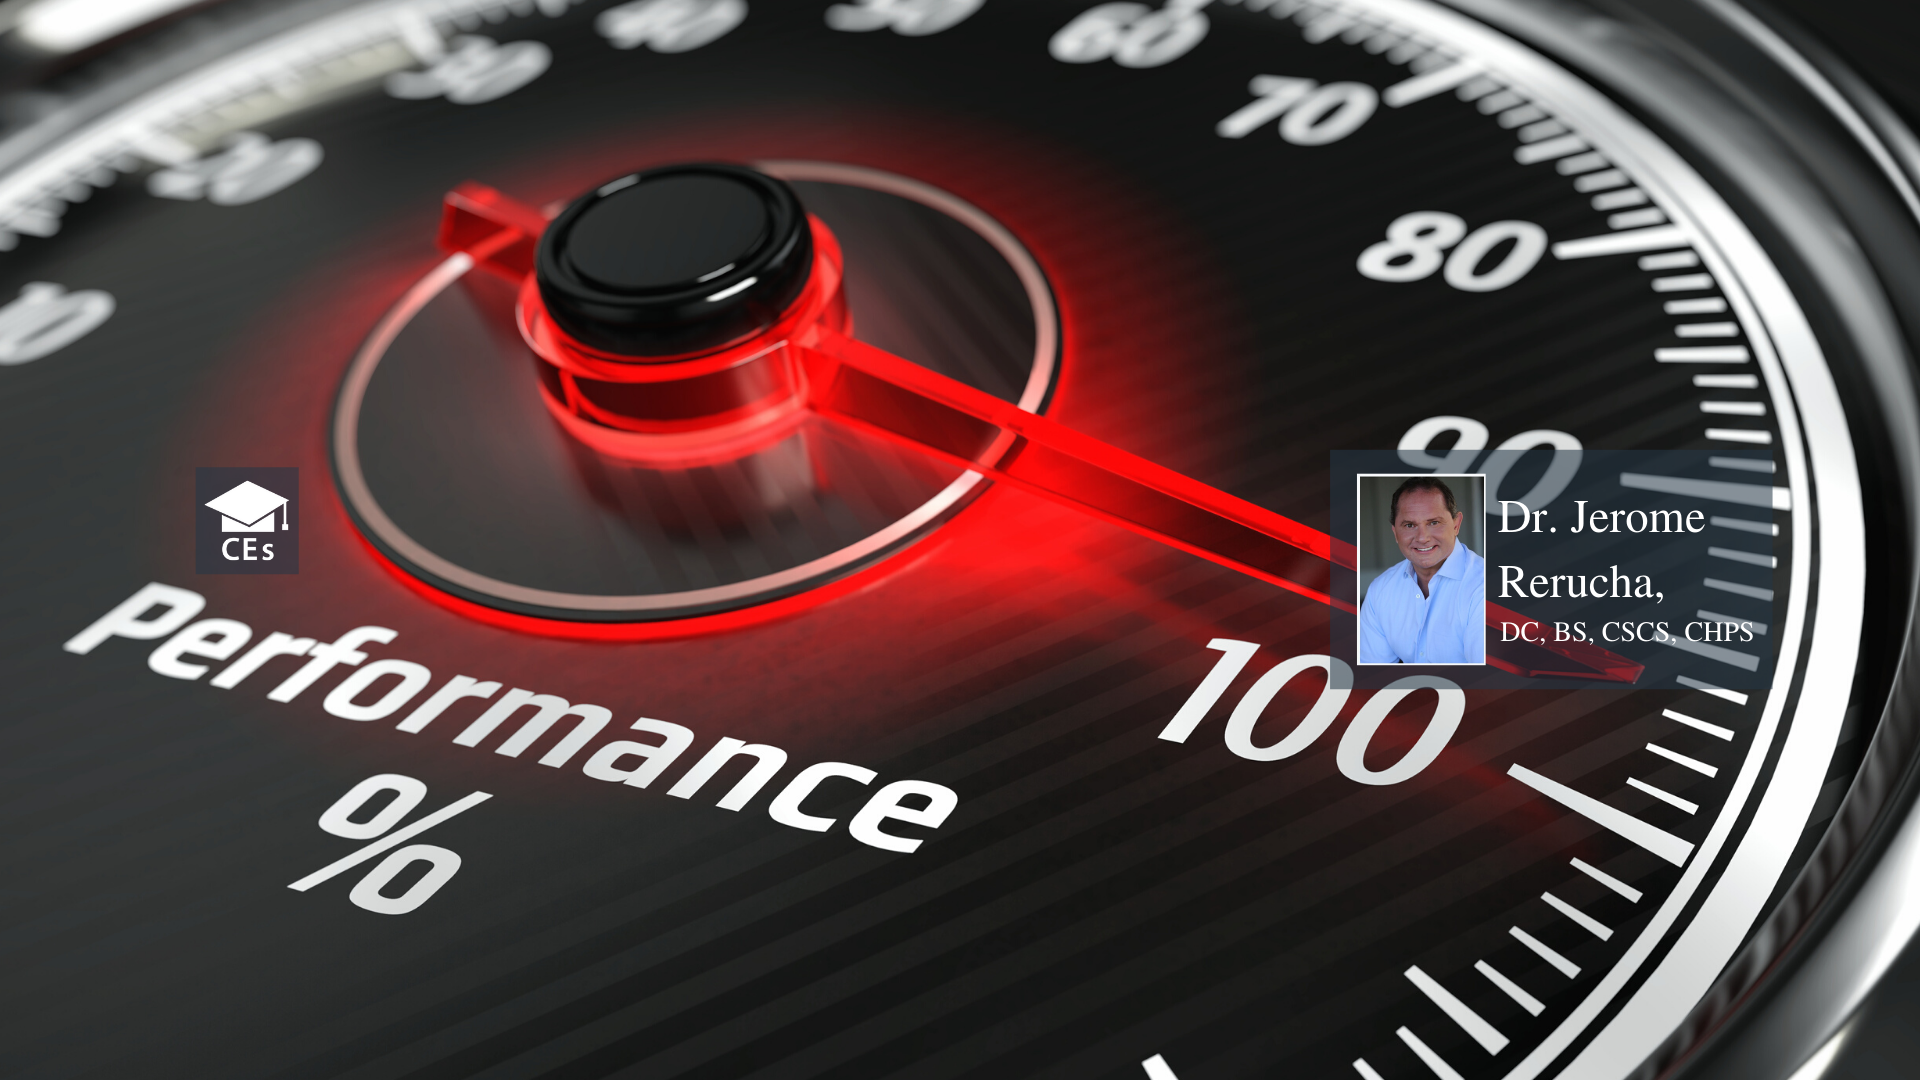 Performance meter with the lever going towards 100